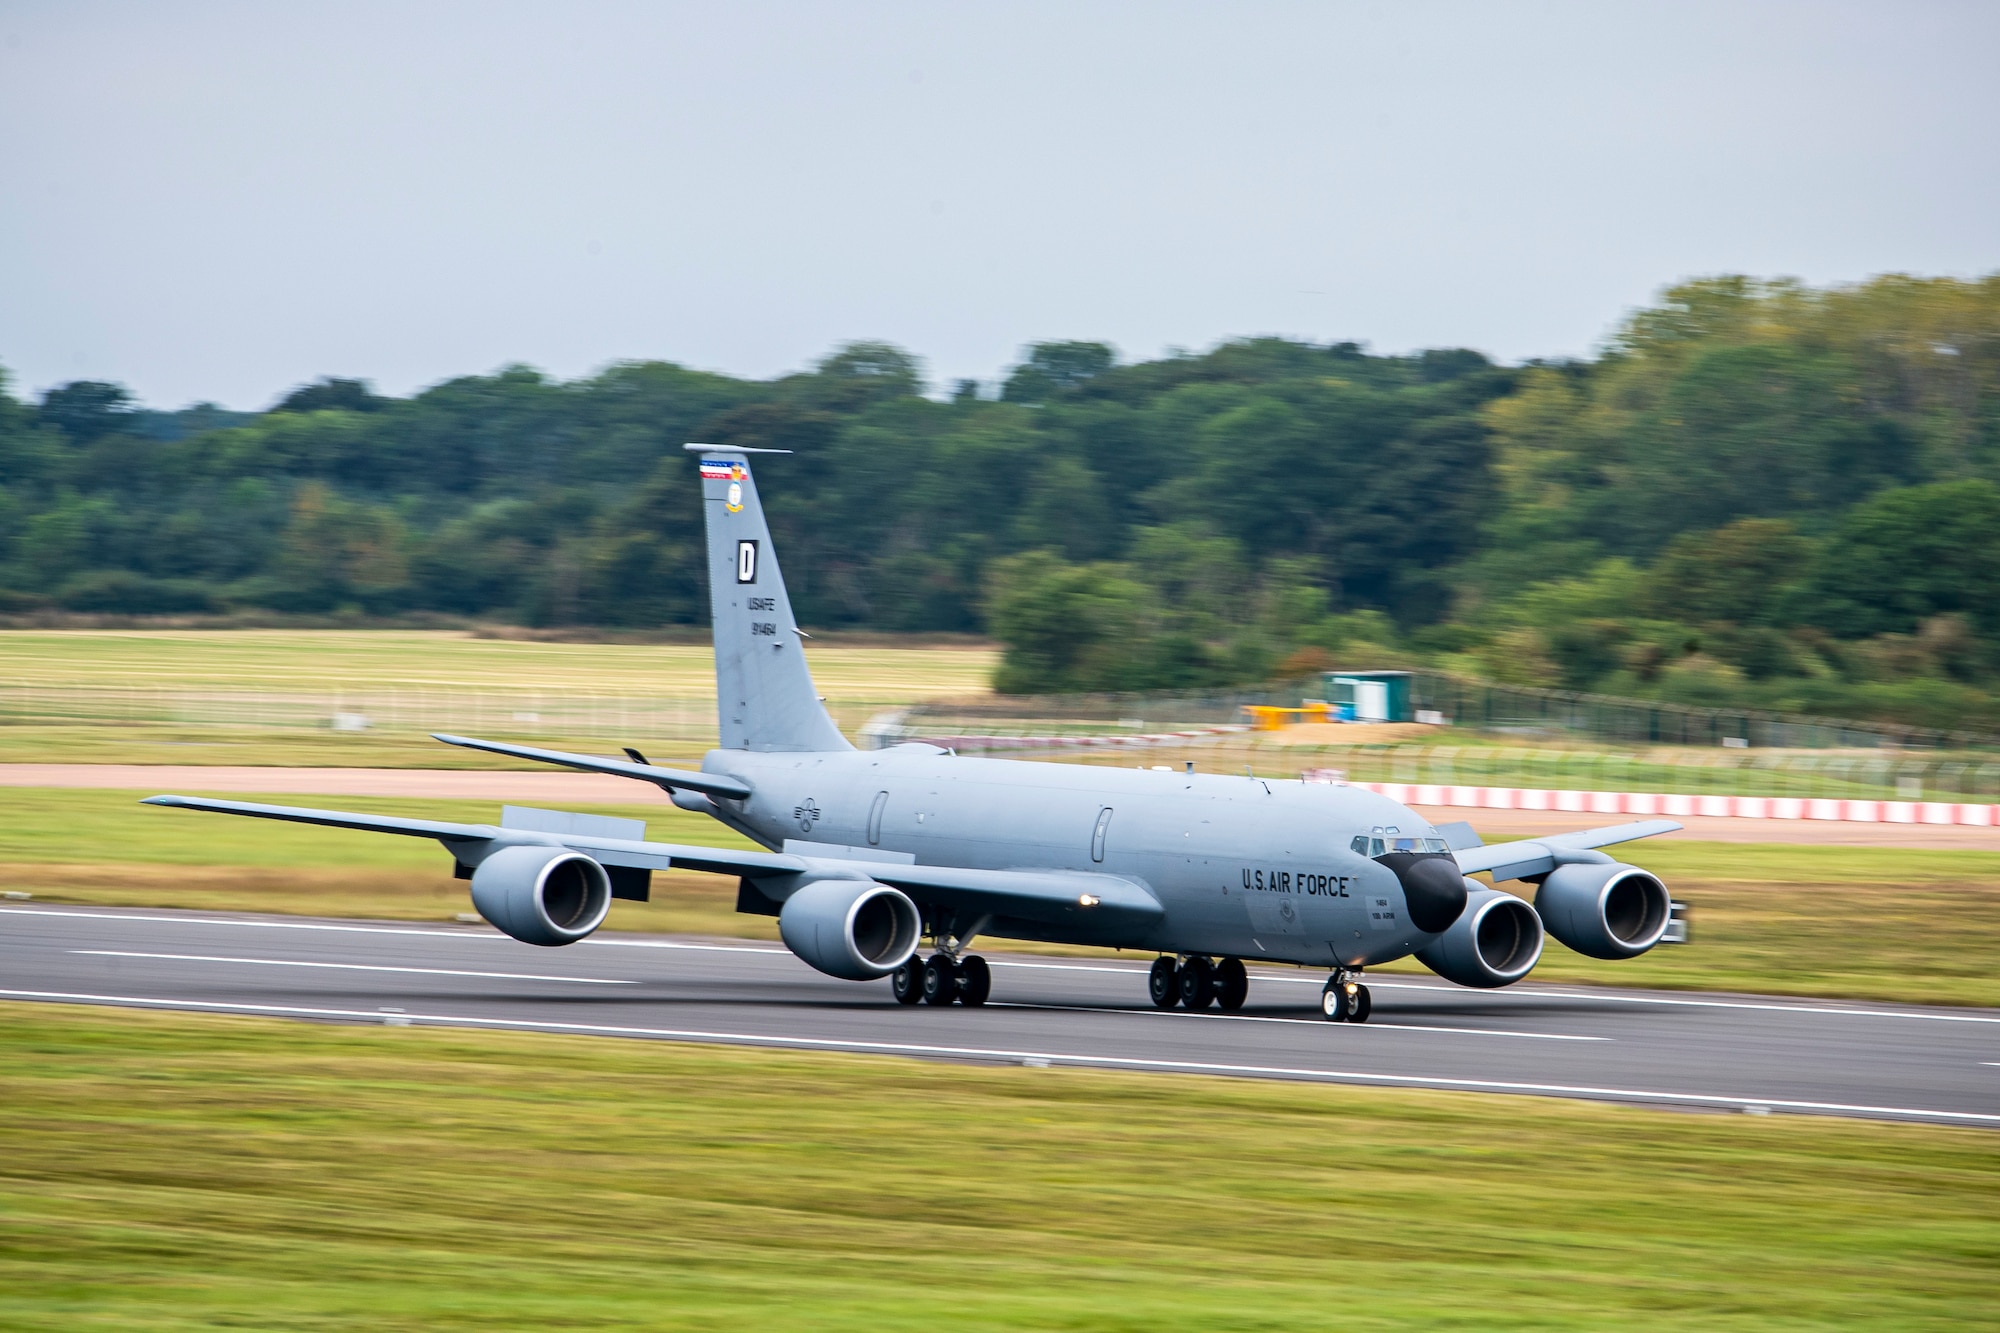 A KC-135 Stratotanker assigned to the 100th Air Refueling Wing lands during an Agile Combat Employment exercise at RAF Fairford, England, Sept. 13, 2021. The exercise enables U.S. forces in Europe to operate from locations with varying levels of capacity and support. This further ensures Airmen and aircrews are postured to deliver lethal combat power across the full spectrum of military operations. (U.S. Air Force photo by Senior Airman Eugene Oliver)